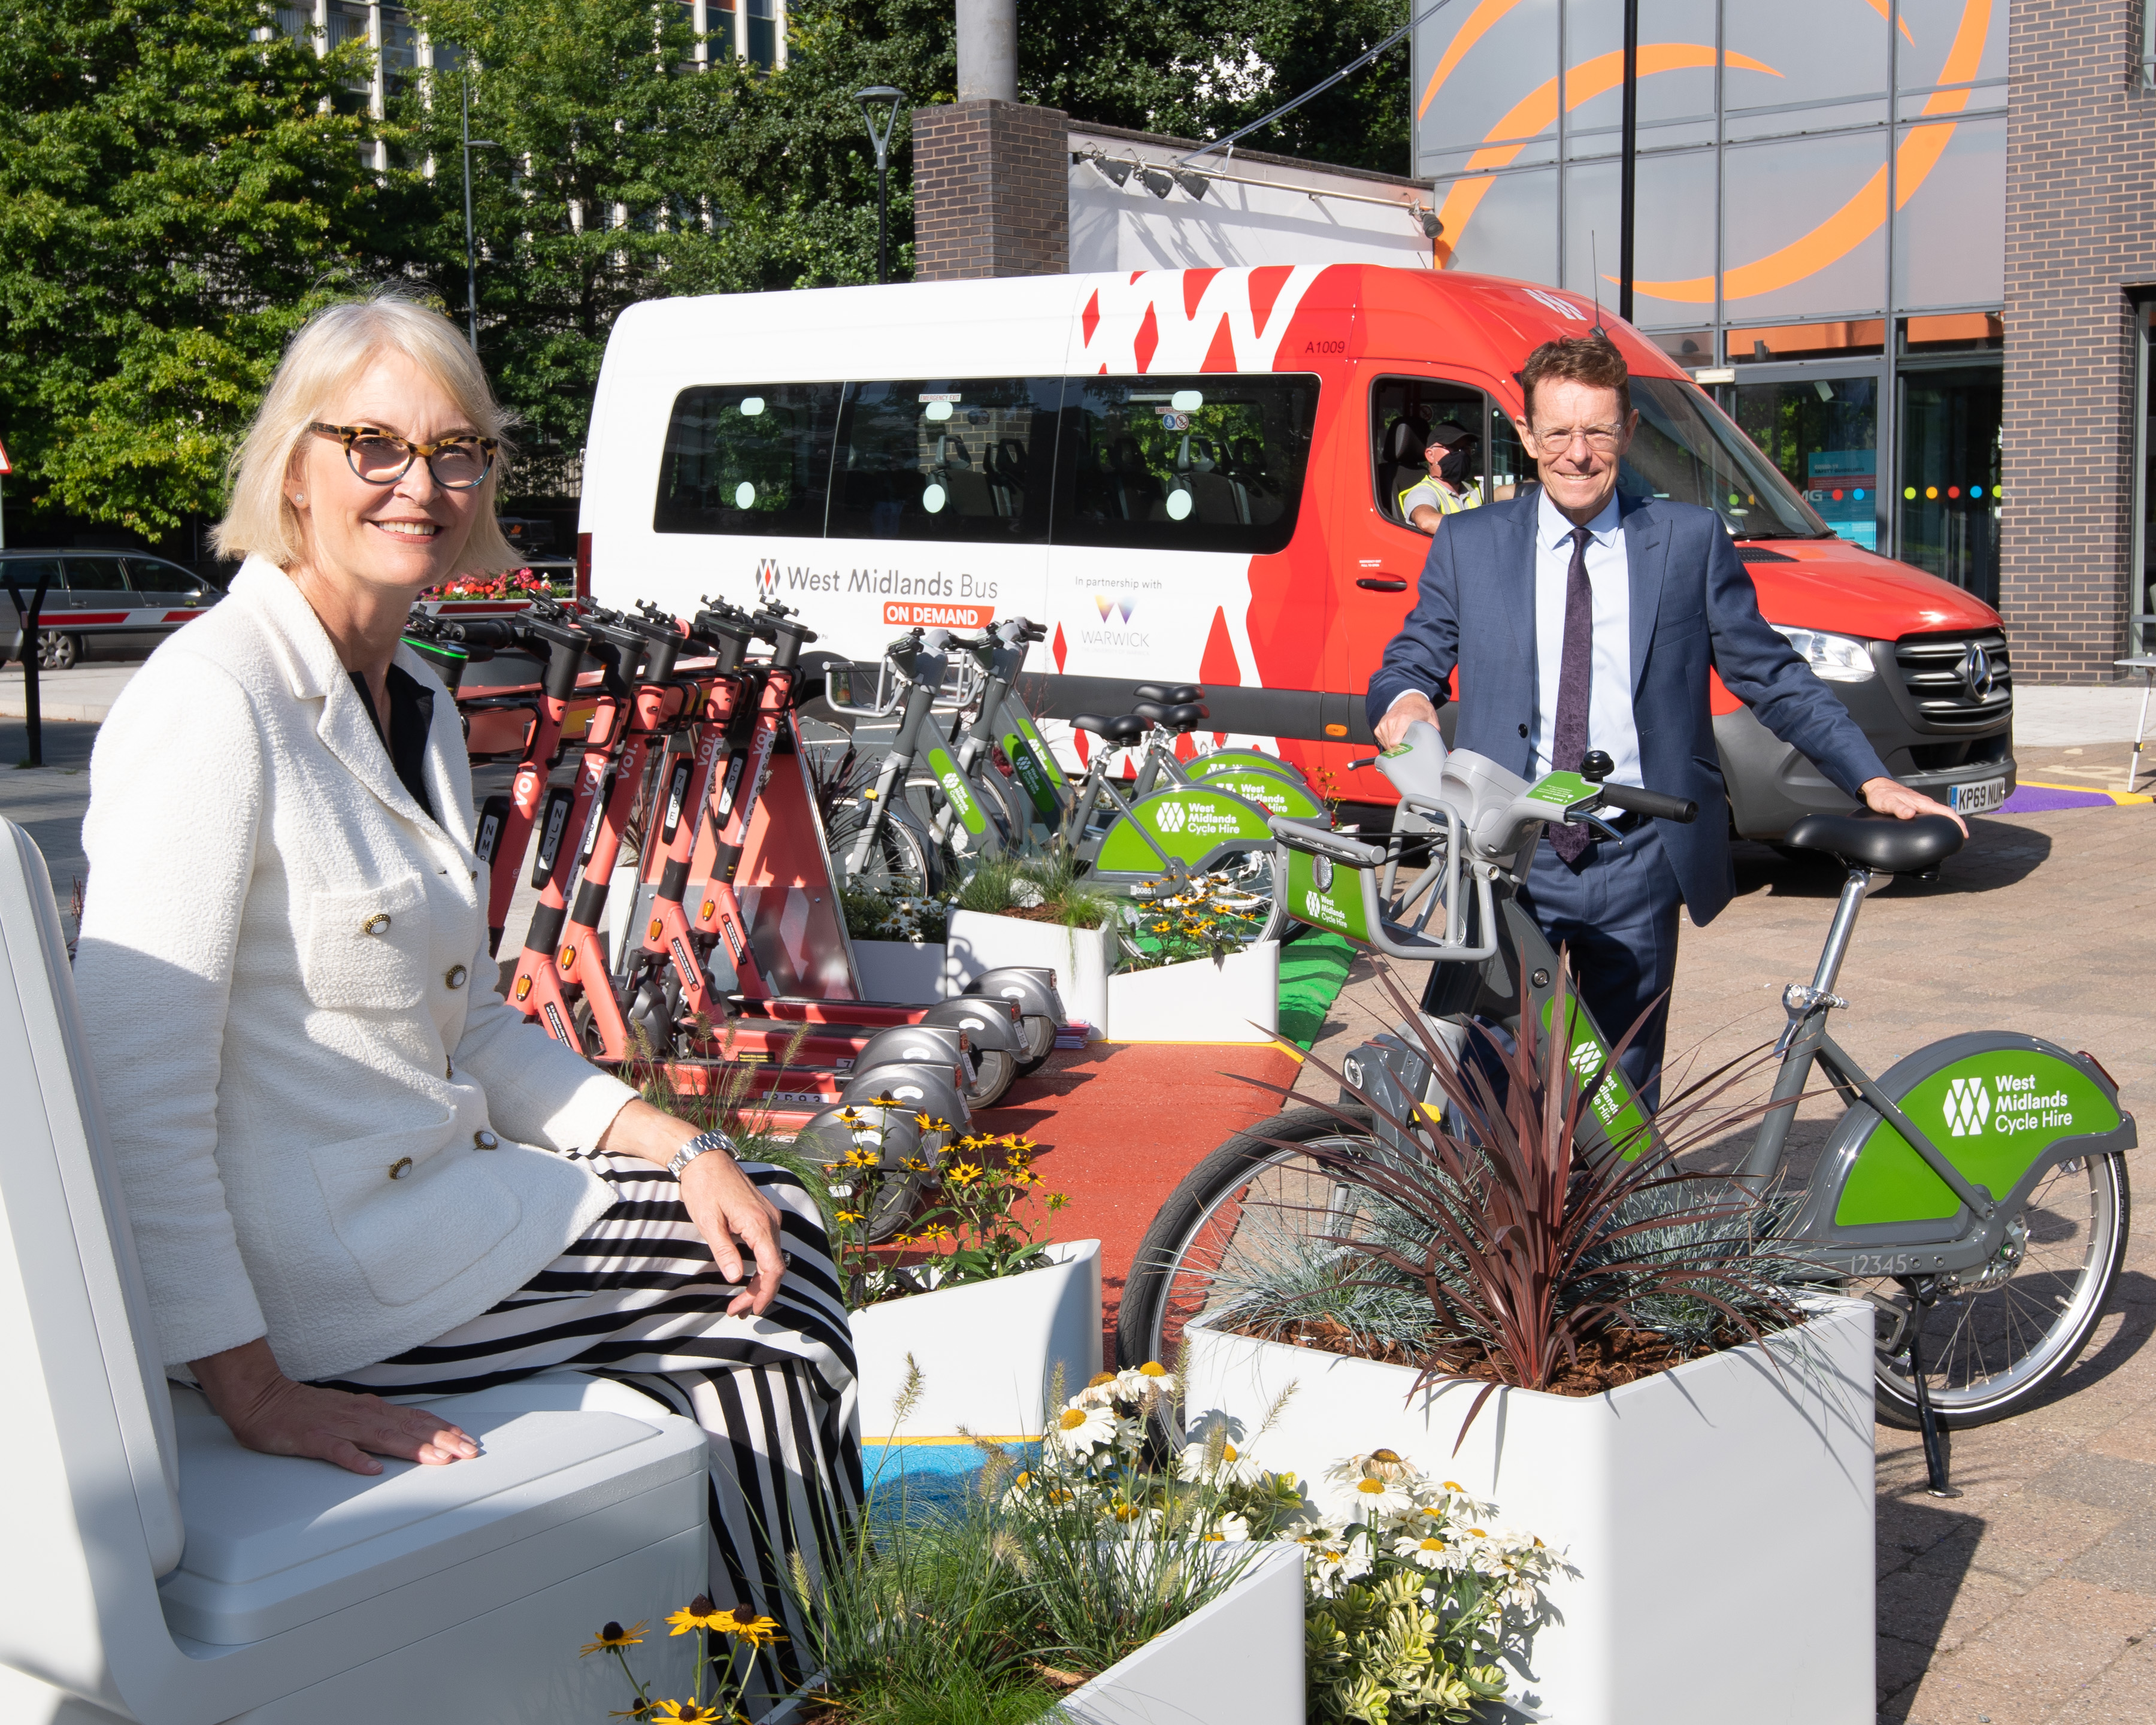 WMG executive chair Margot James and Mayor of the West Midlands Andy Street visit the mobility hub at the Micromobility UK event